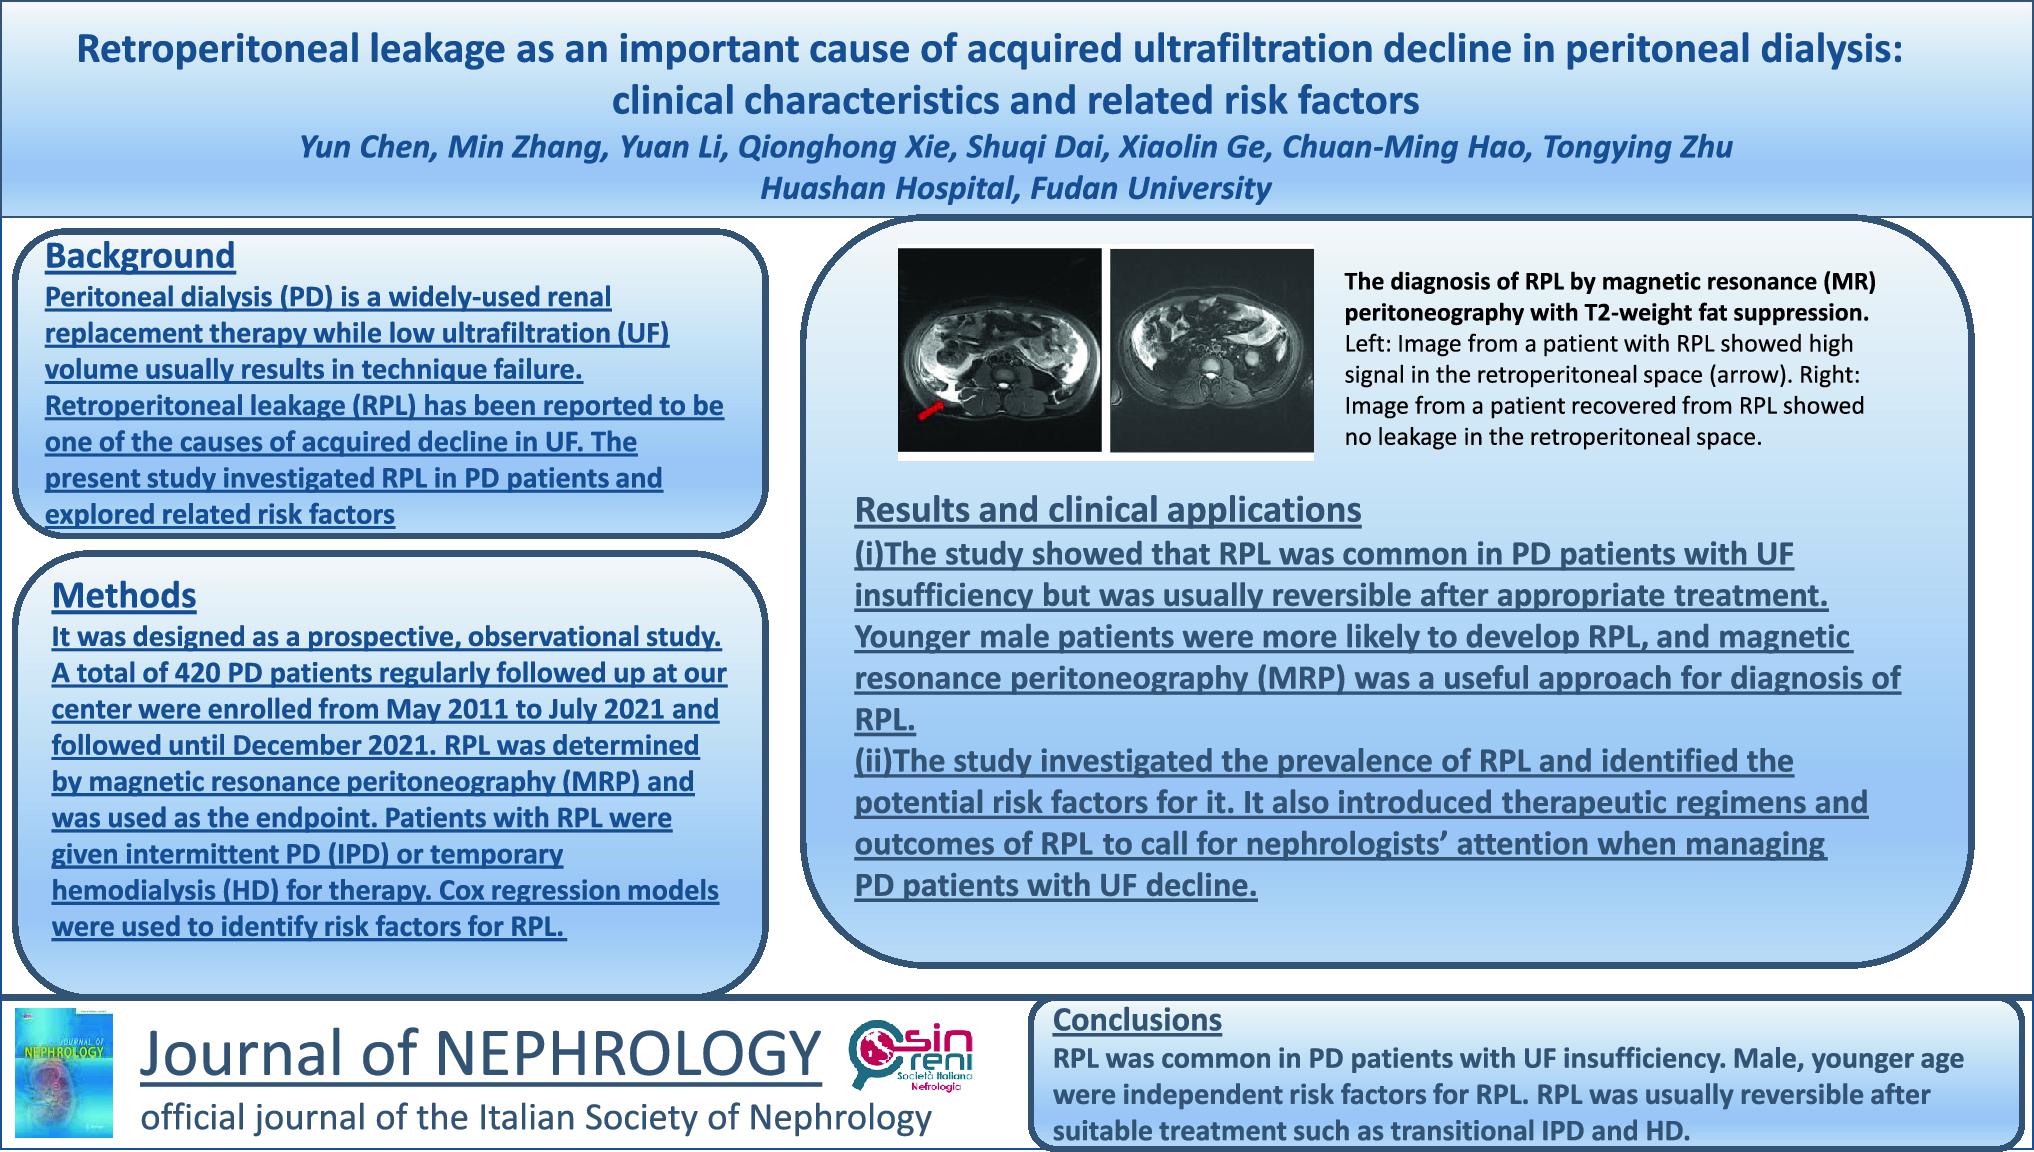 Retroperitoneal leakage as an important cause of acquired ultrafiltration decline in peritoneal dialysis: clinical characteristics and related risk factors